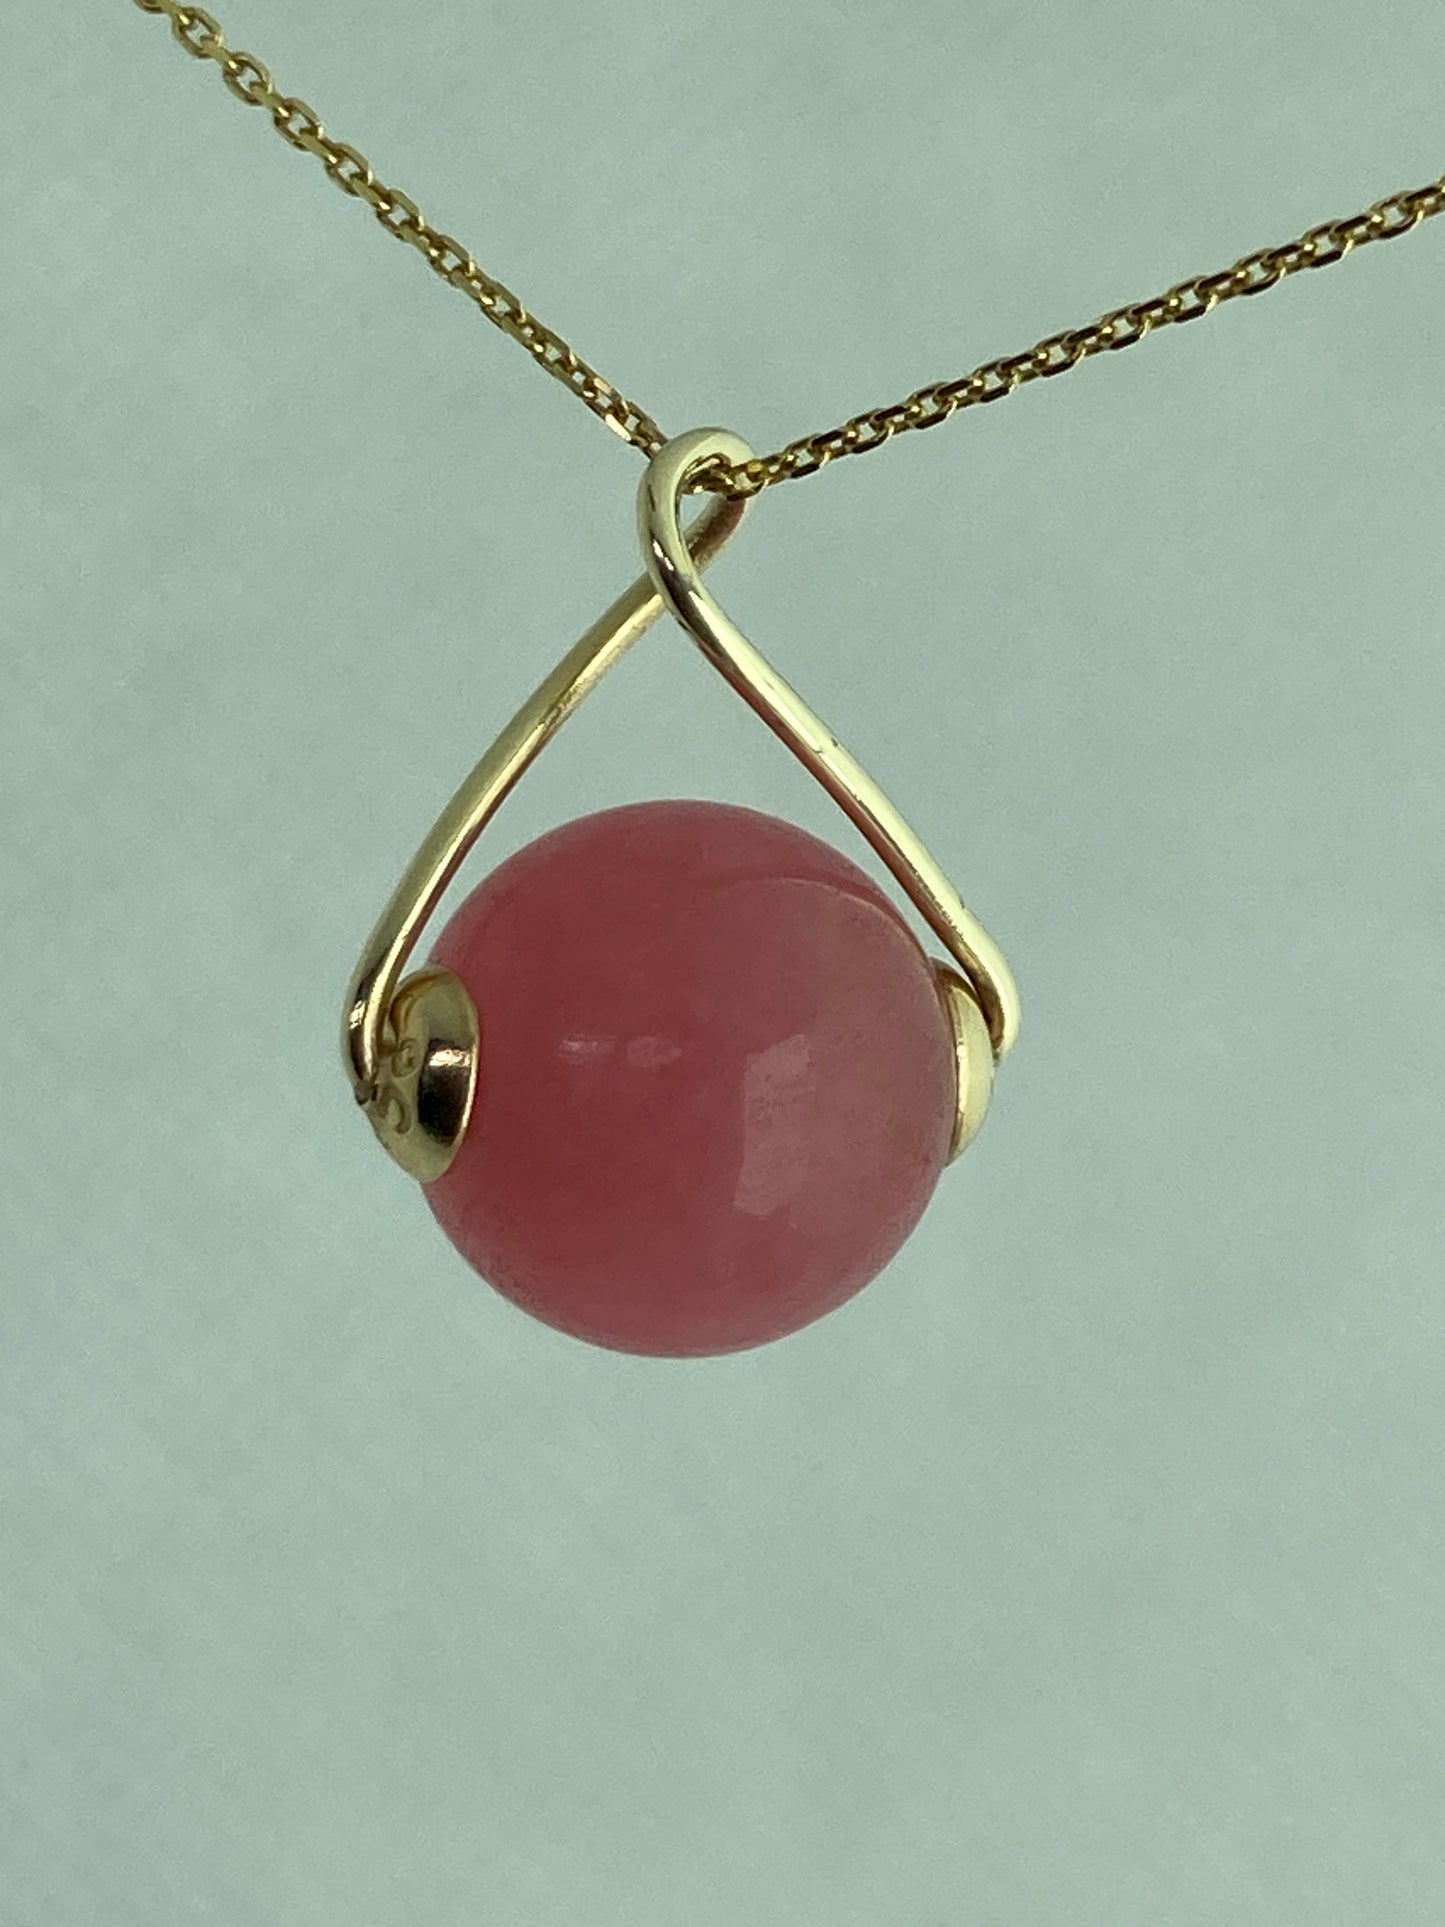 9ct gold pink Jade necklace , 18” chain